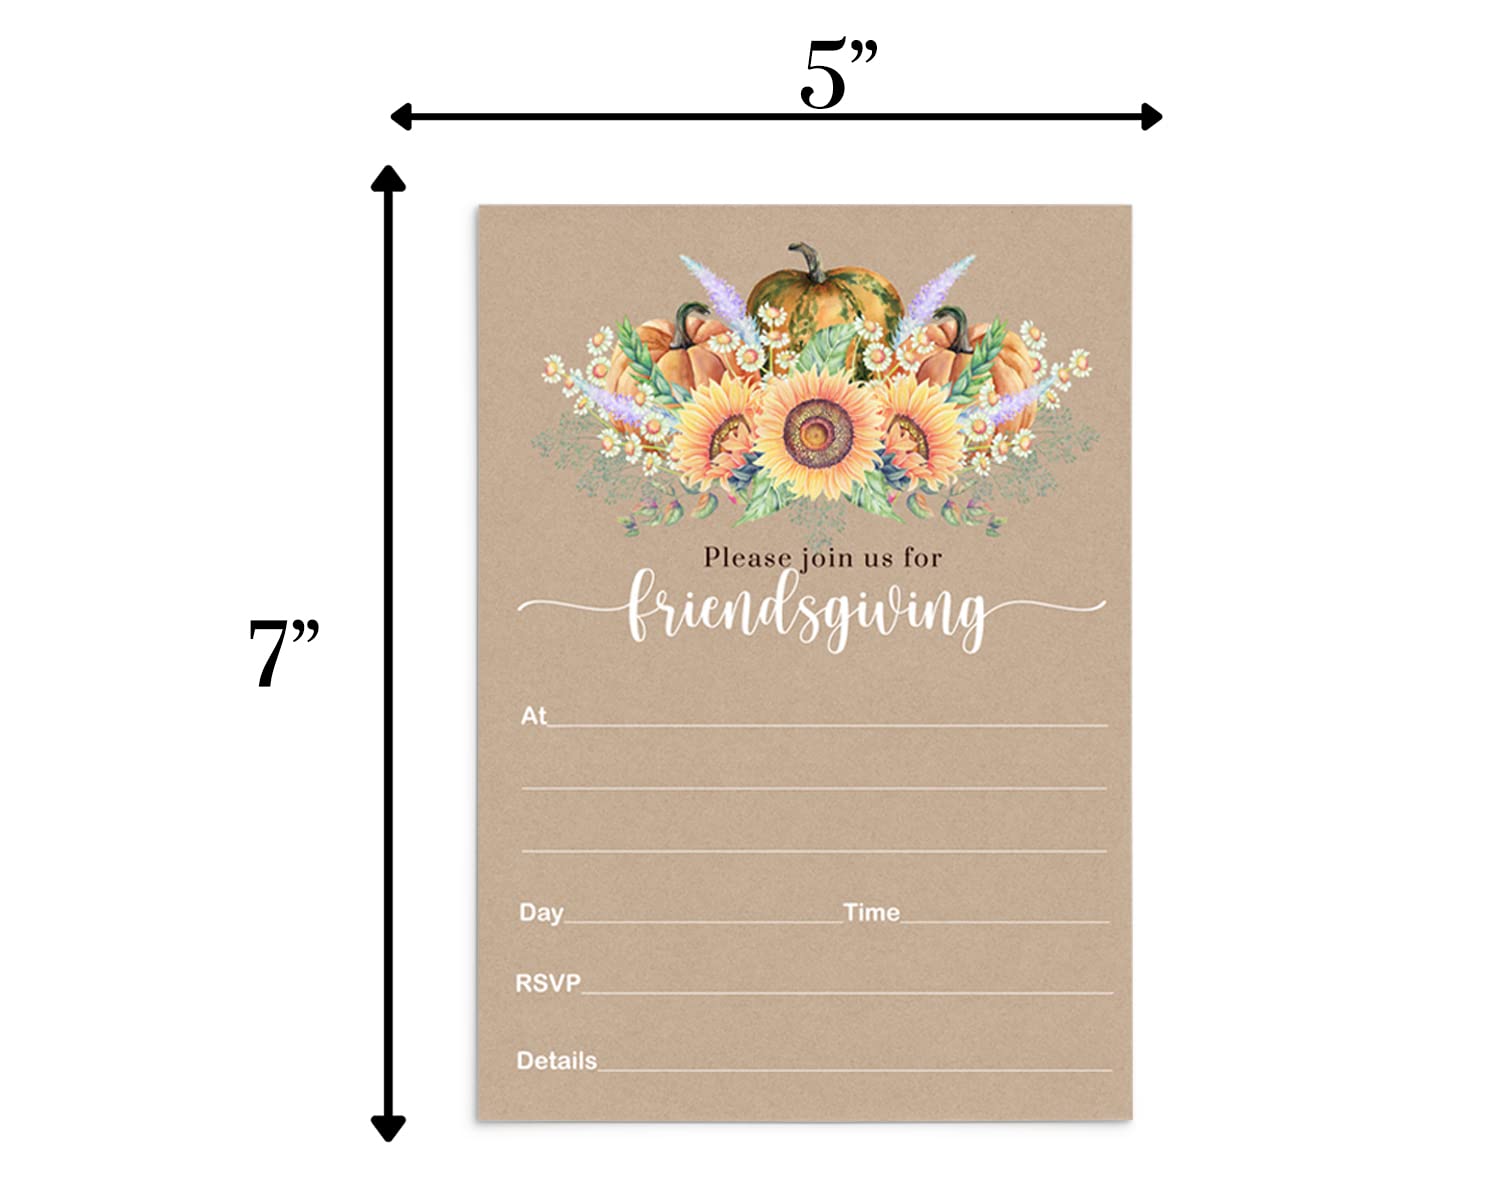 Friends - Blank Fall Invite Card Set - Autumn Harvest Sunflower Themed Printed 5x7Paper Clever Party